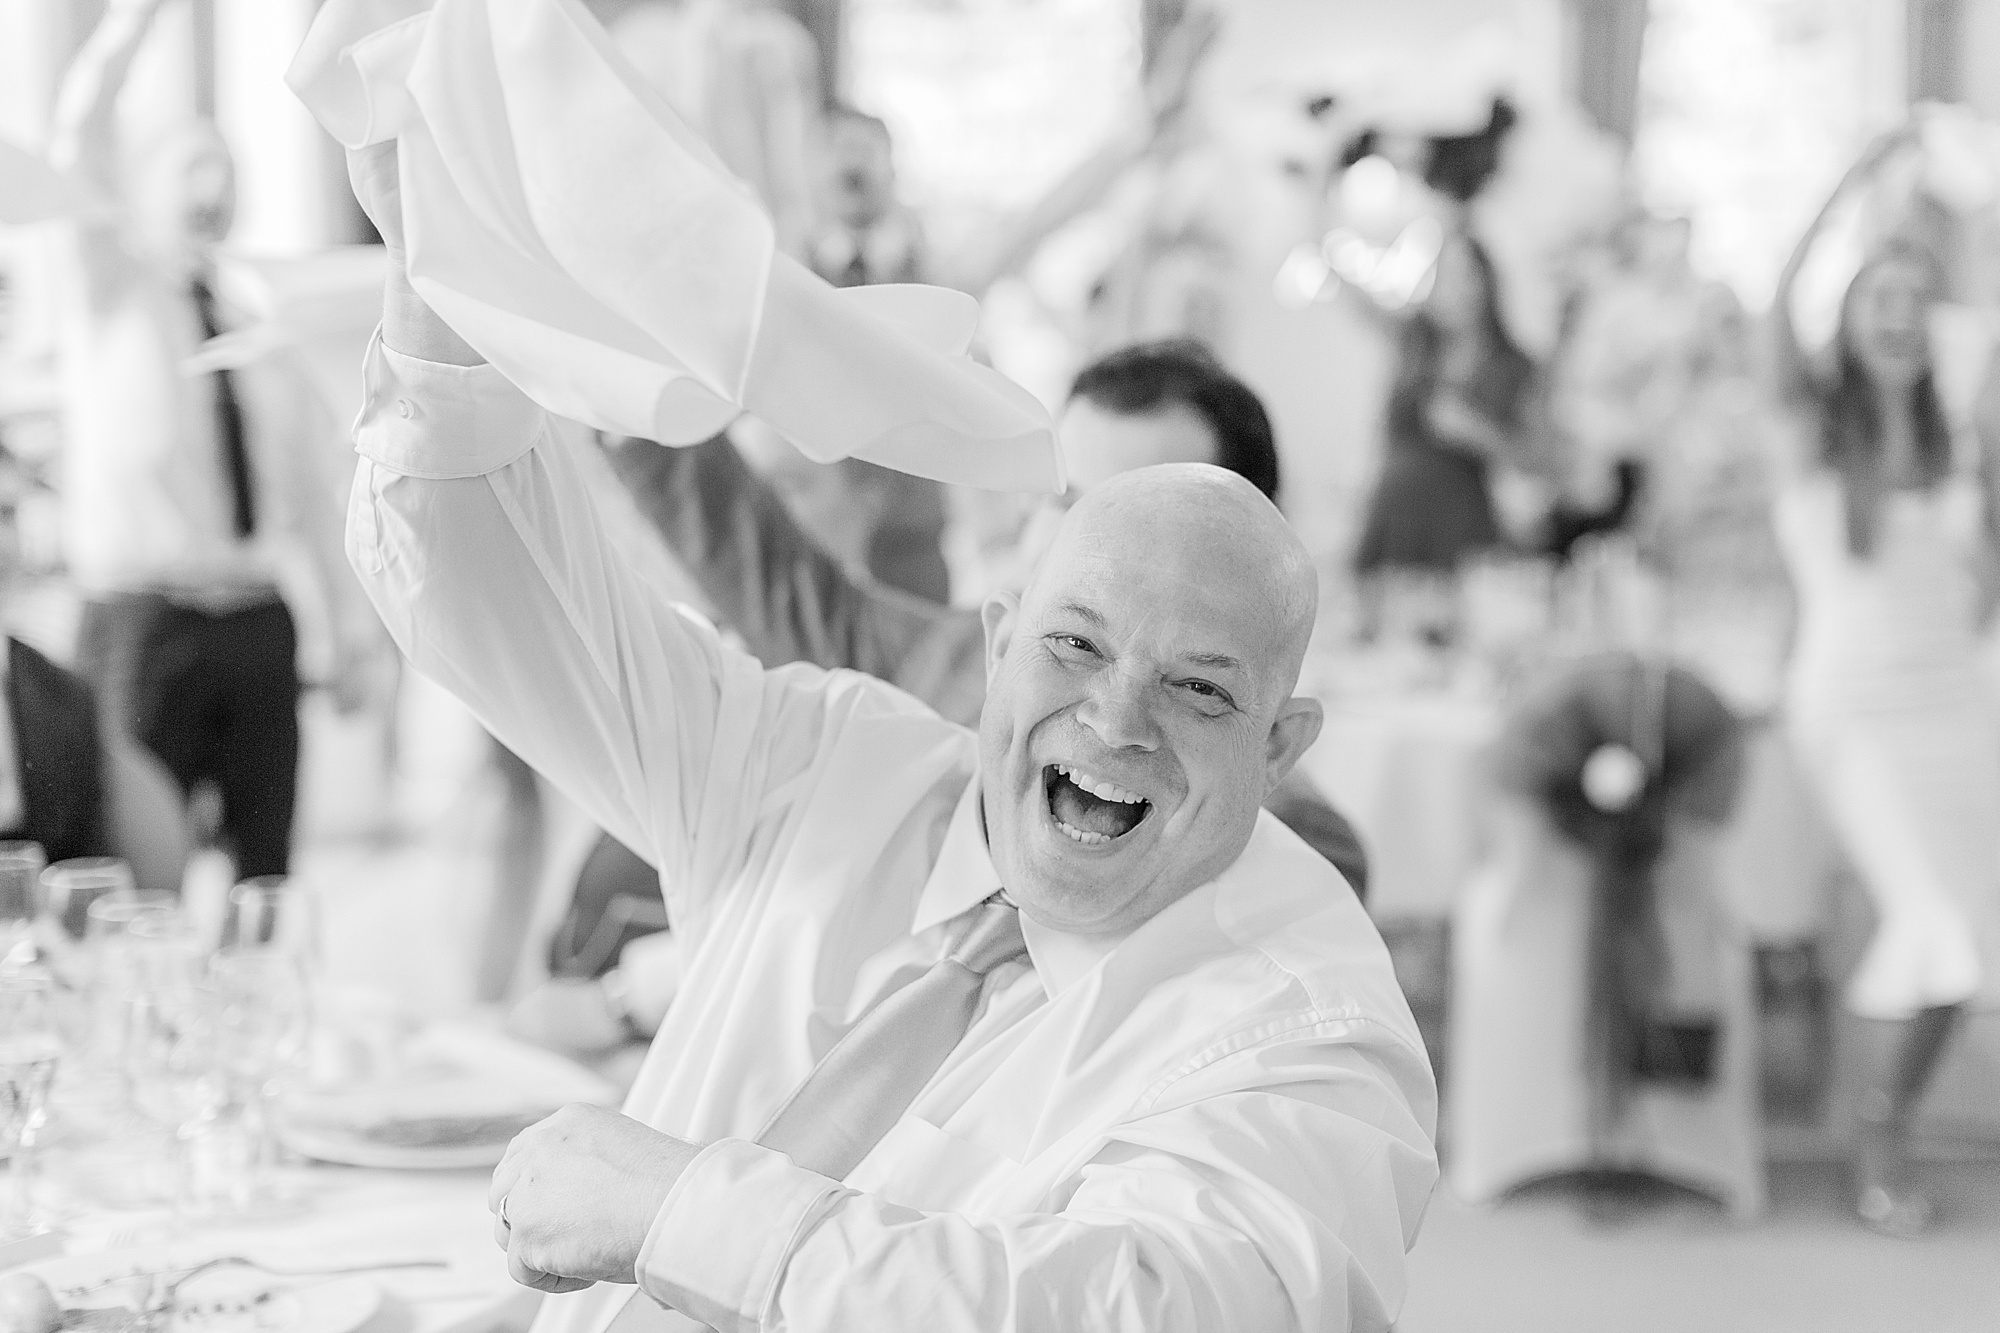 Photo shows a wedding guest holding their napkin in the air and cheering/singing to singing waiters performing